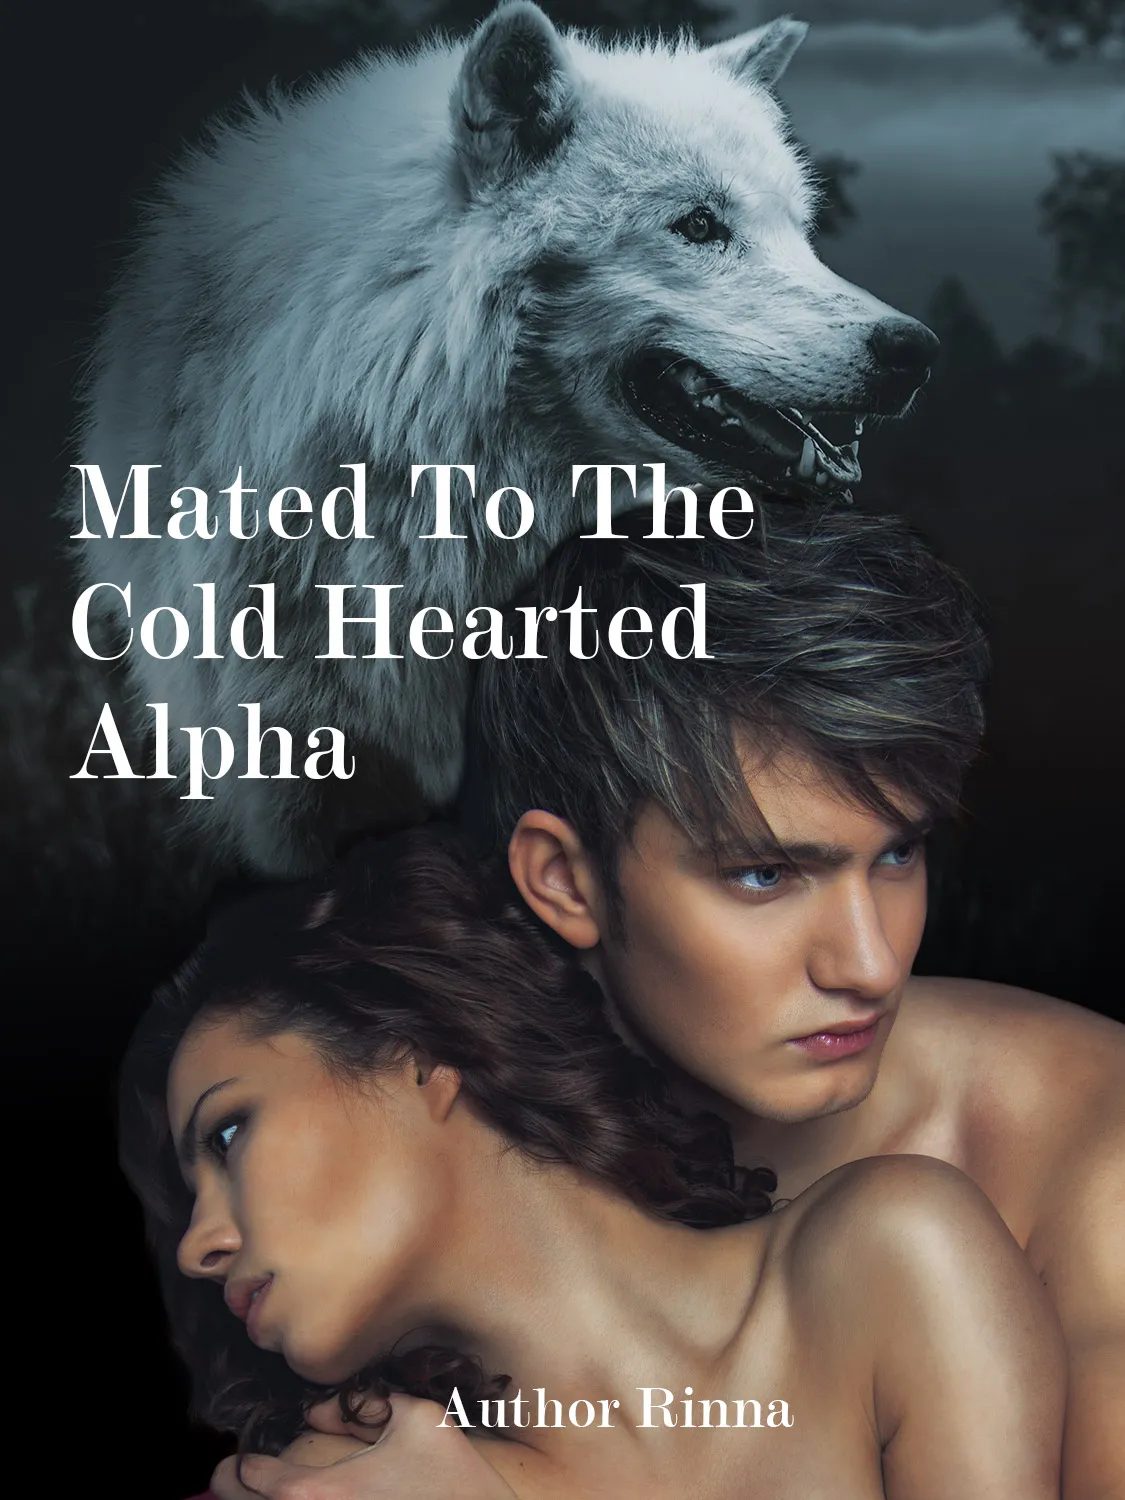 Mated to the Cold Hearted Alpha